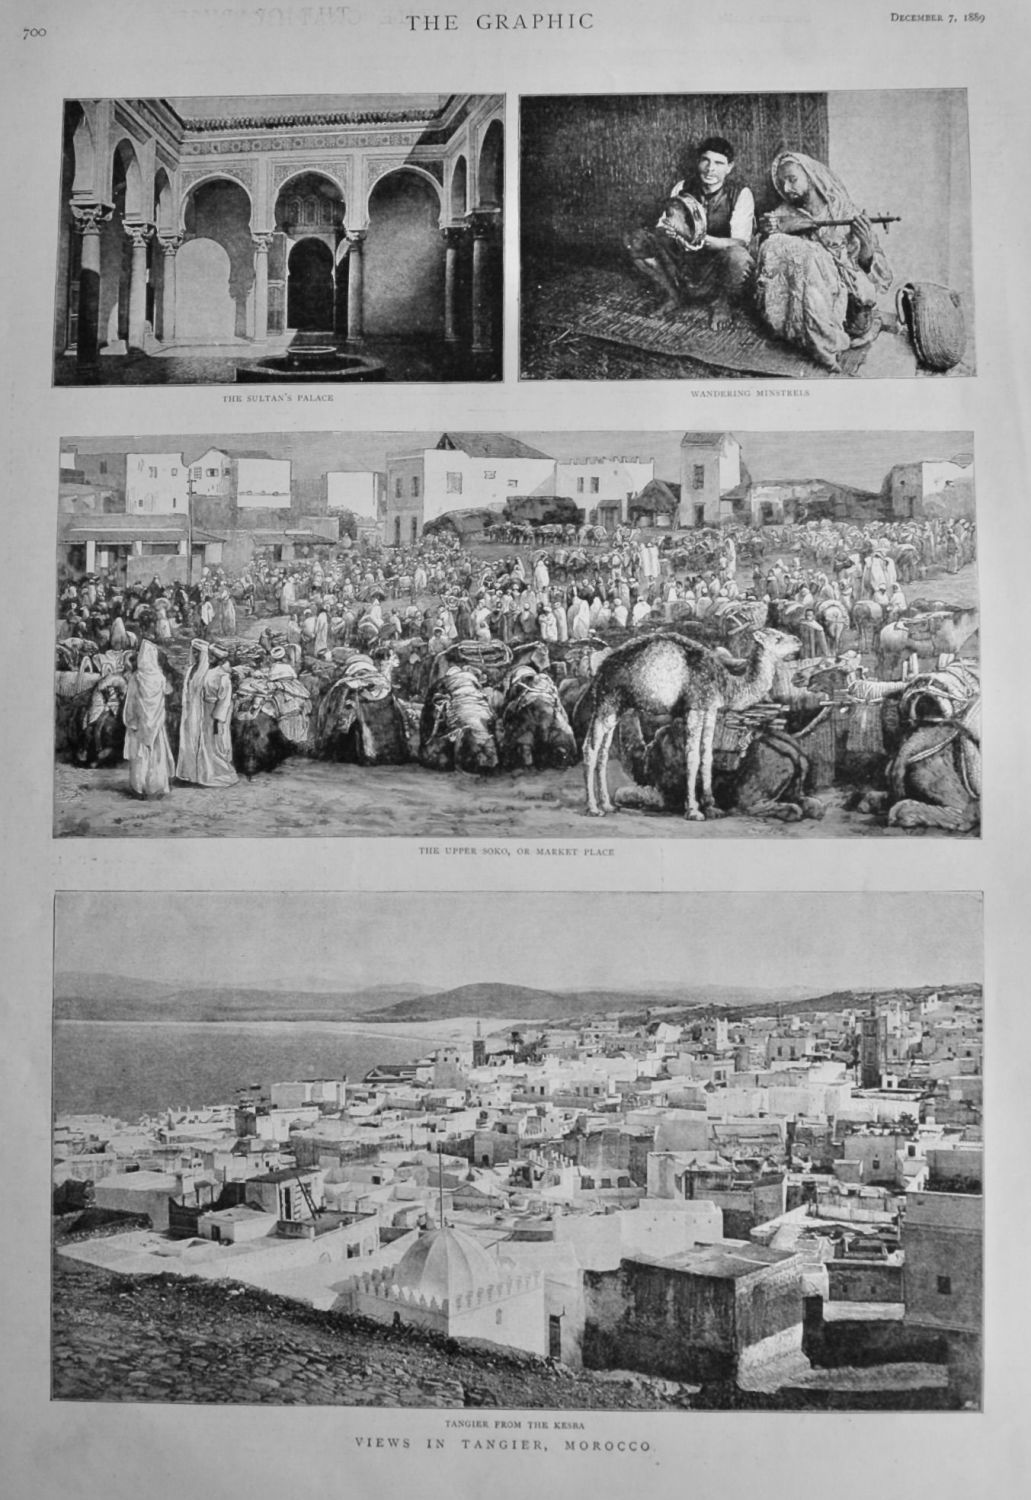 Views in Tangier, Morocco.  1889.